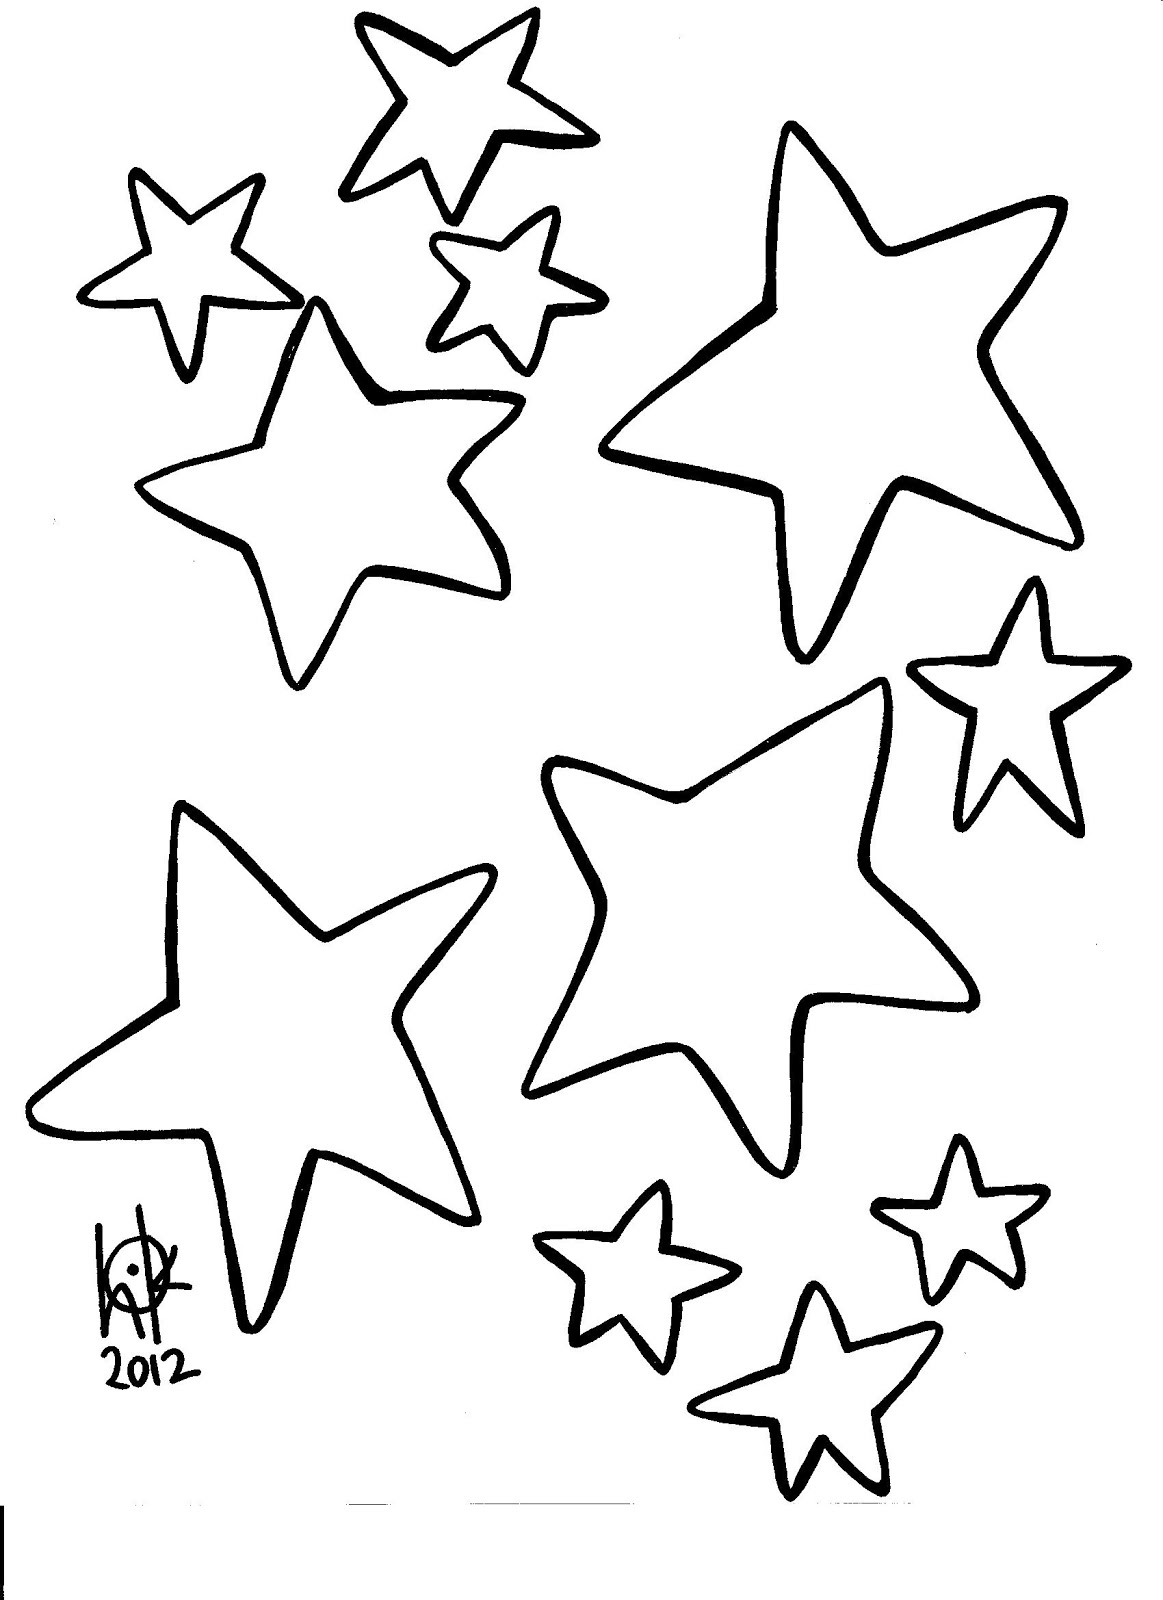 Printable Star Template - ClipArt Best - ClipArt Best